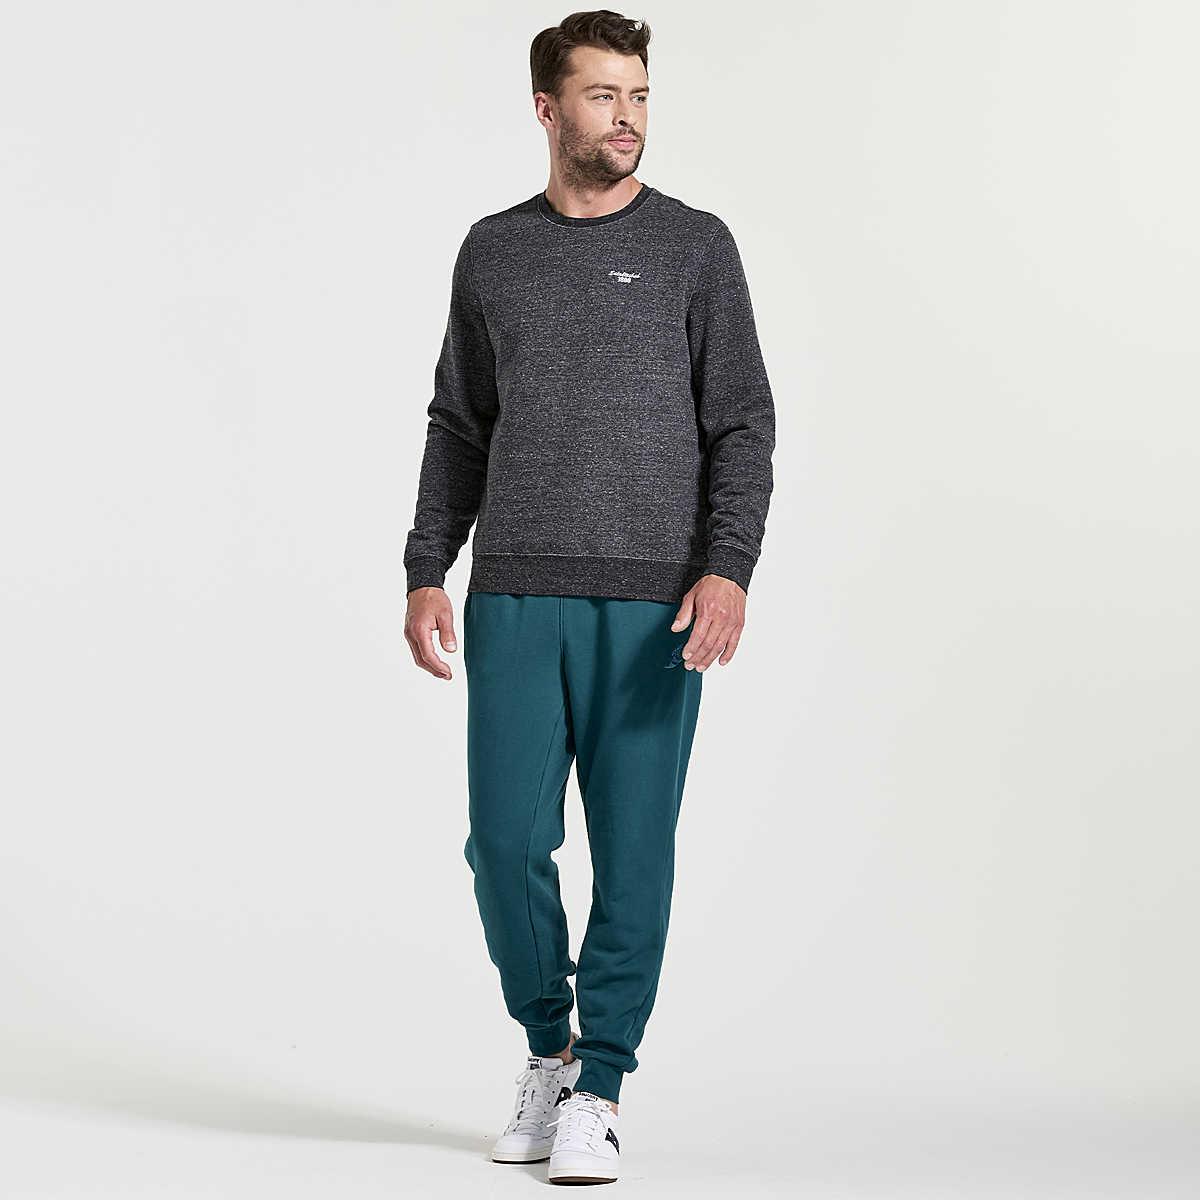 Saucony - Men's Rested Sweatpant - The Shoe Collective